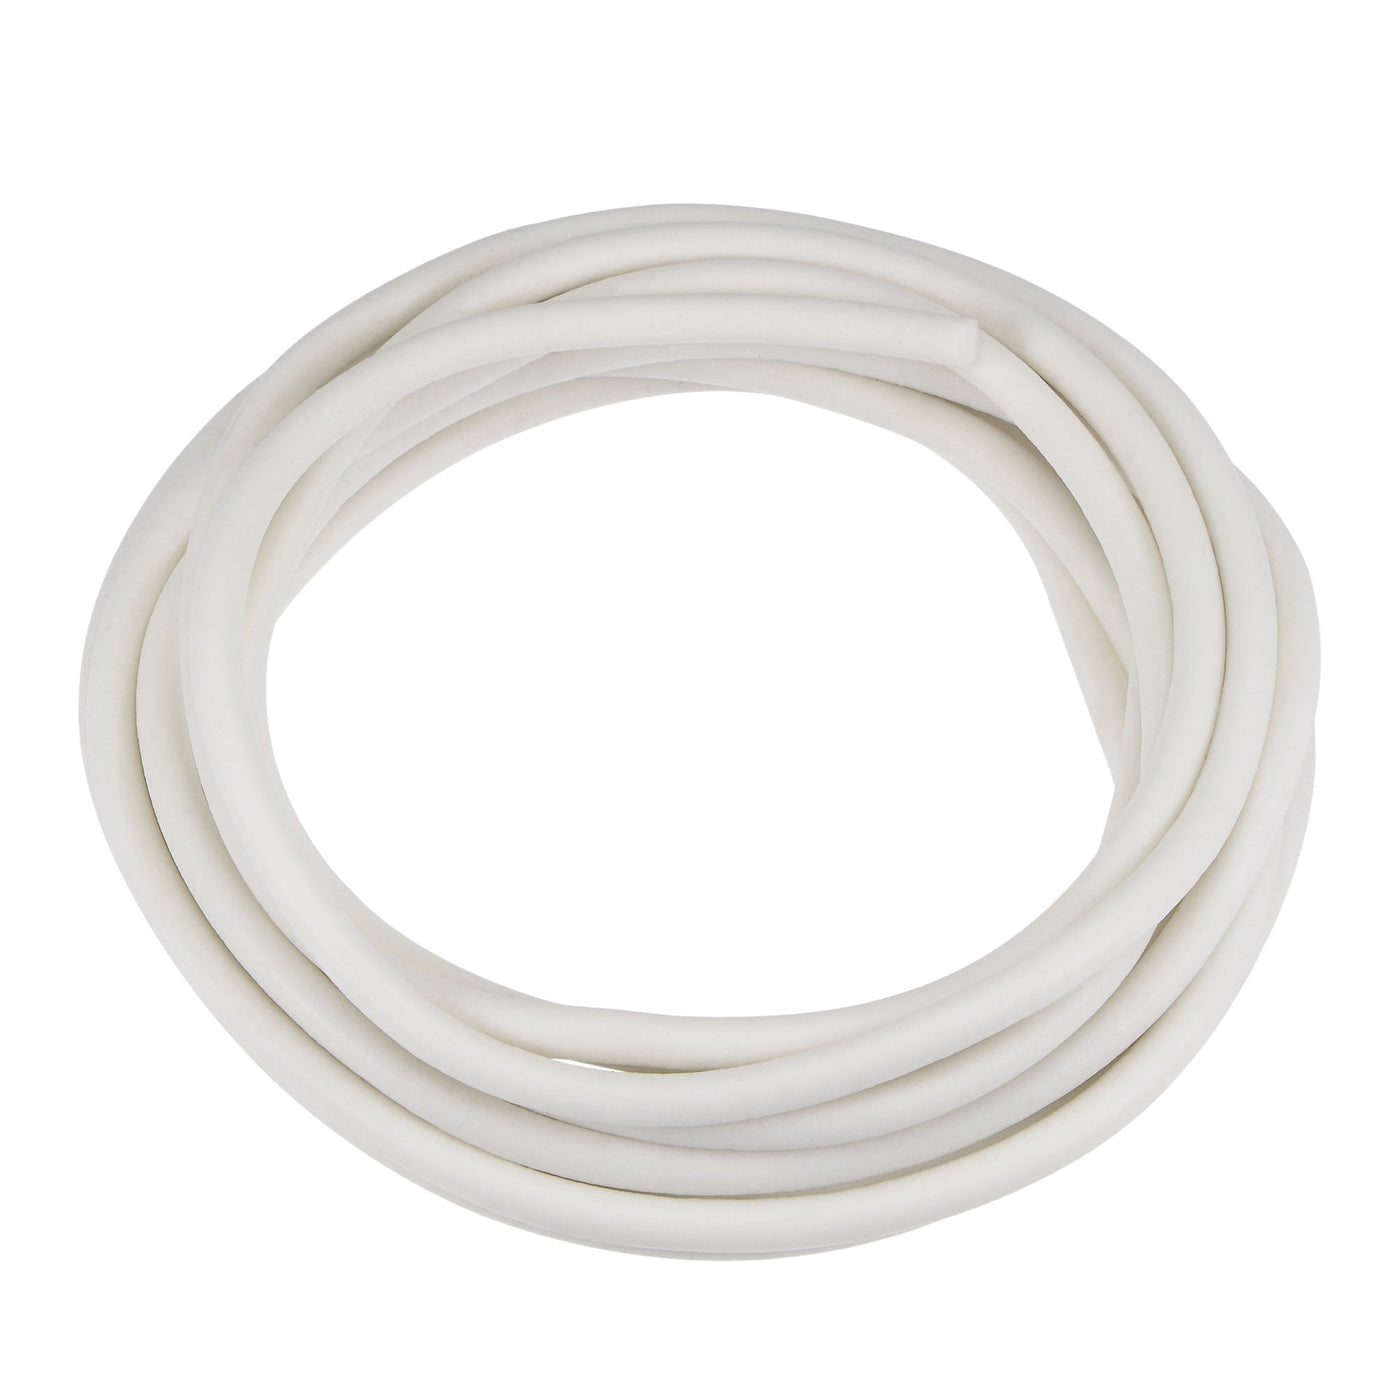 uxcell Uxcell 5mm Soft Silicone Bending Insert Tube for Rigid Tubing 13ft White